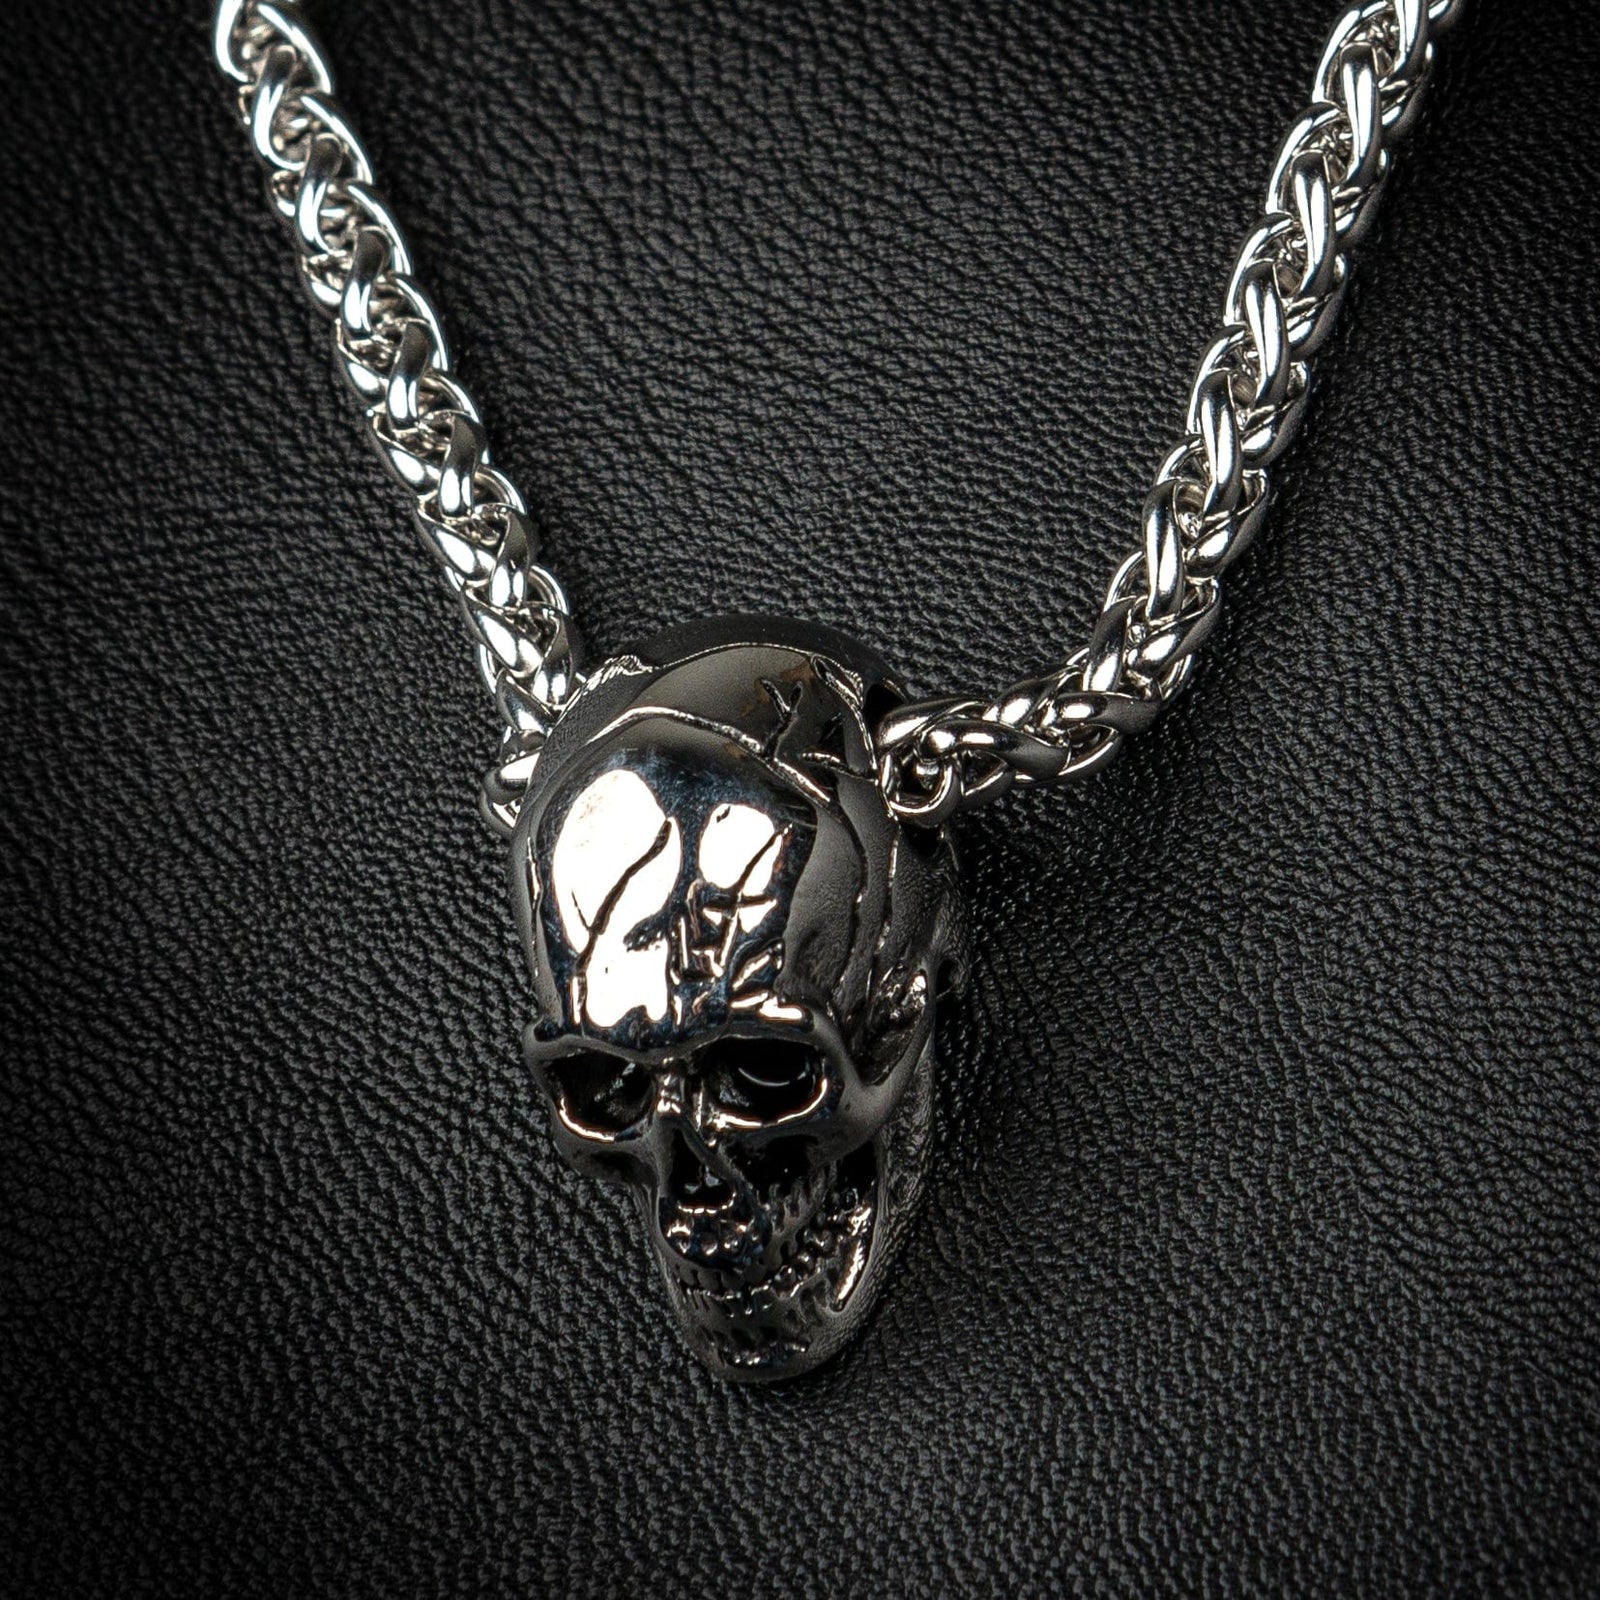 Silver Skull Pendant Necklace With A Headset - VVV Jewelry